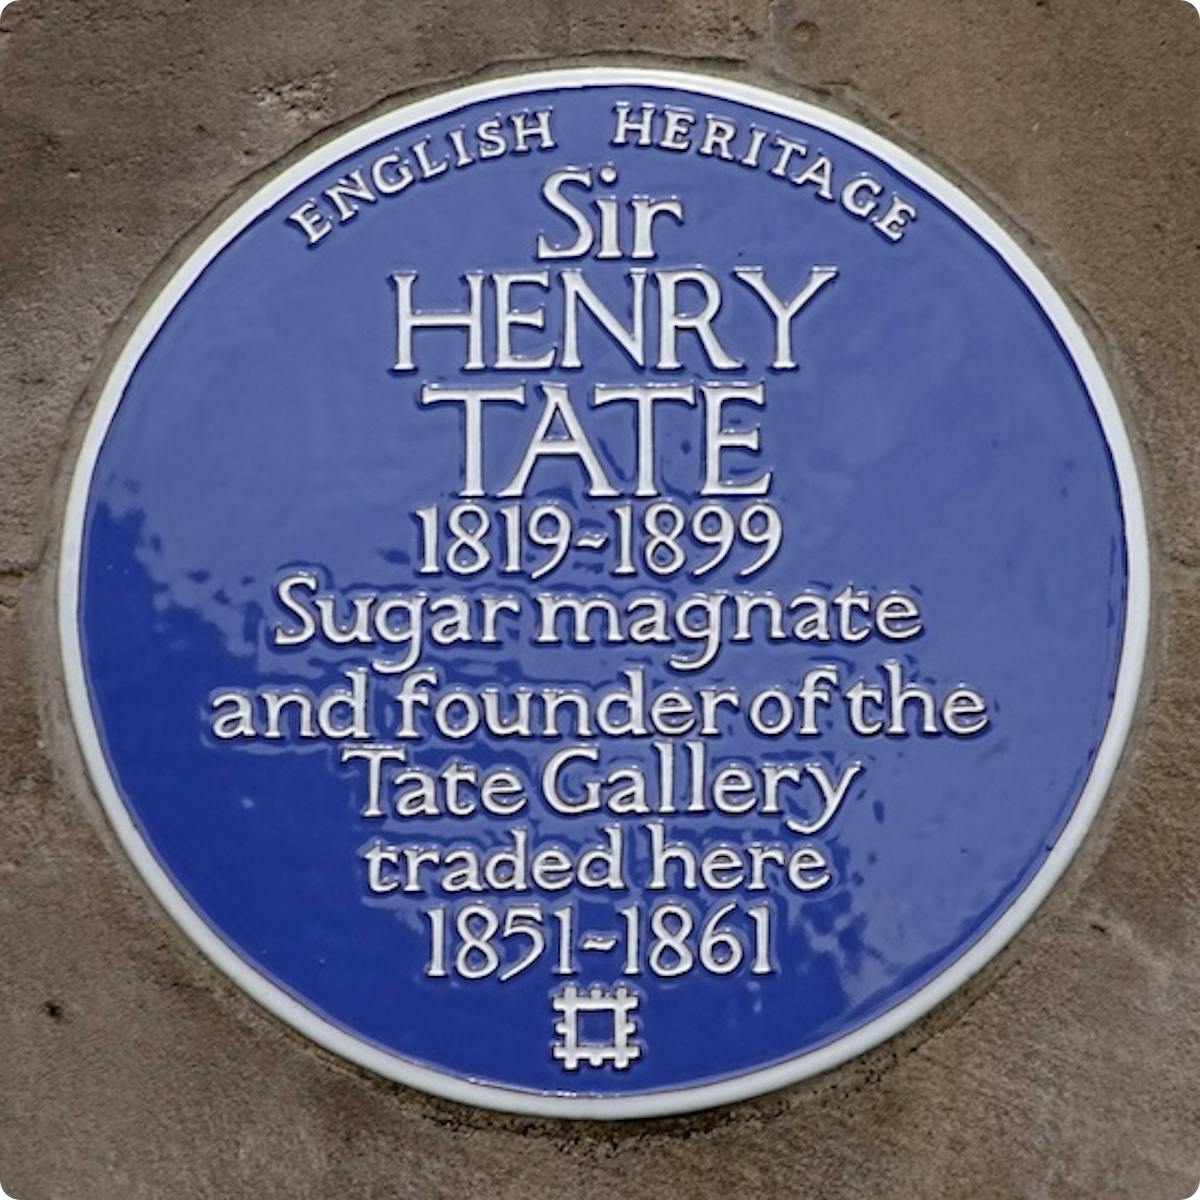 A plaque commemorating Henry Tate